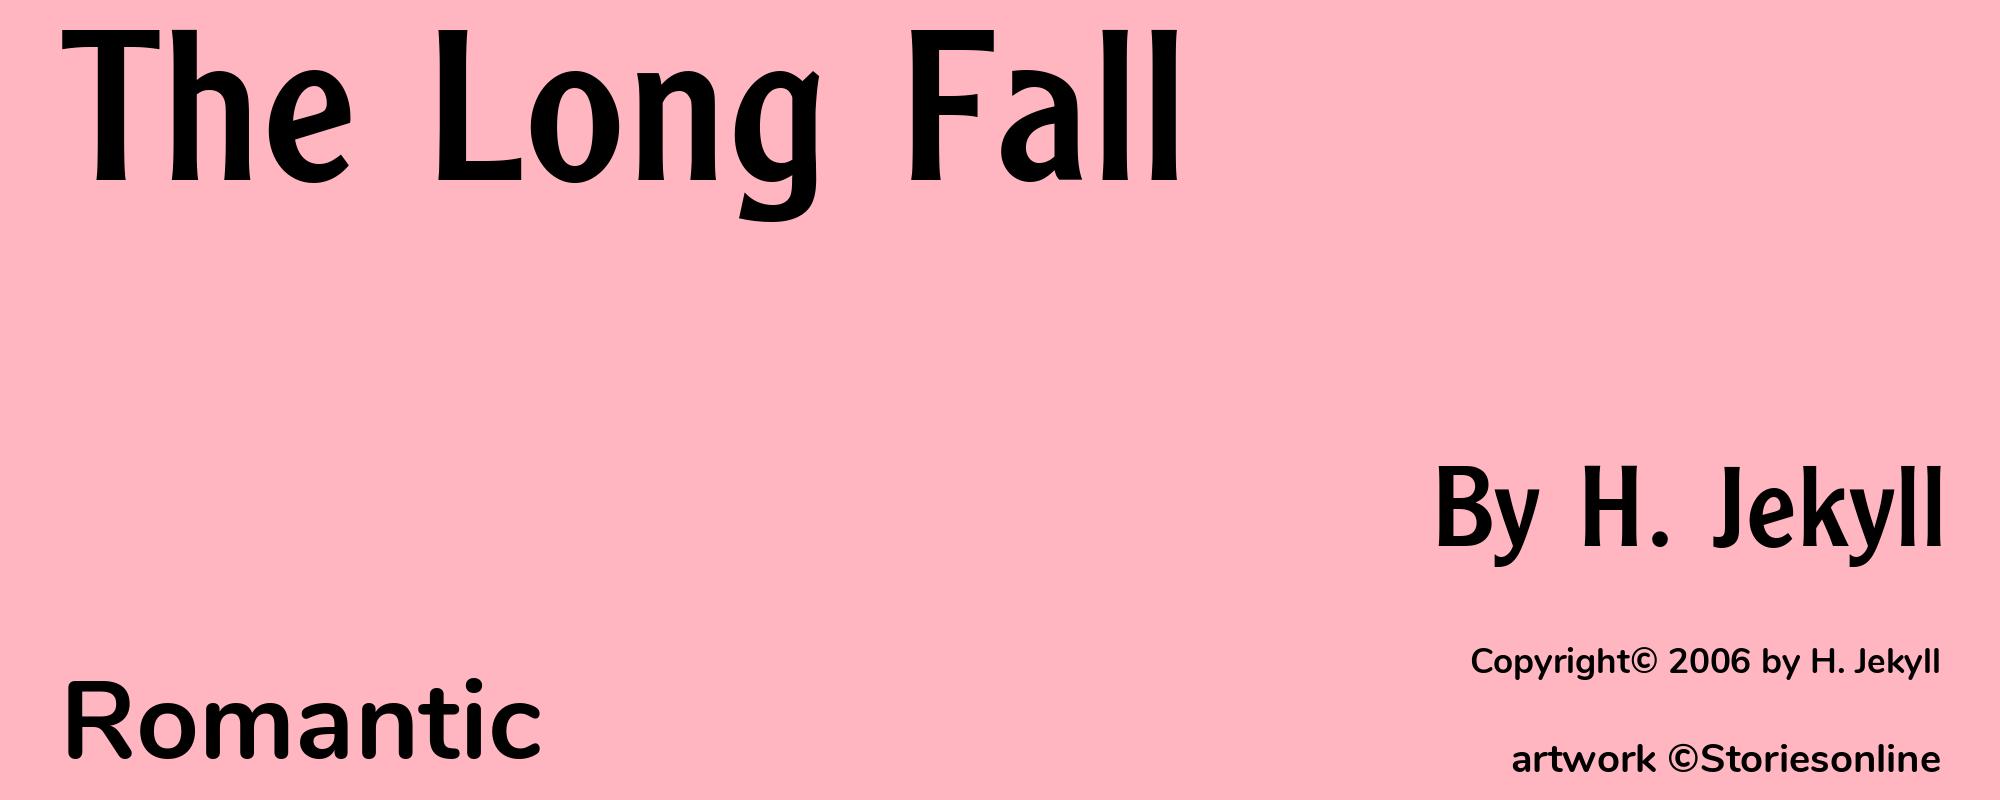 The Long Fall - Cover